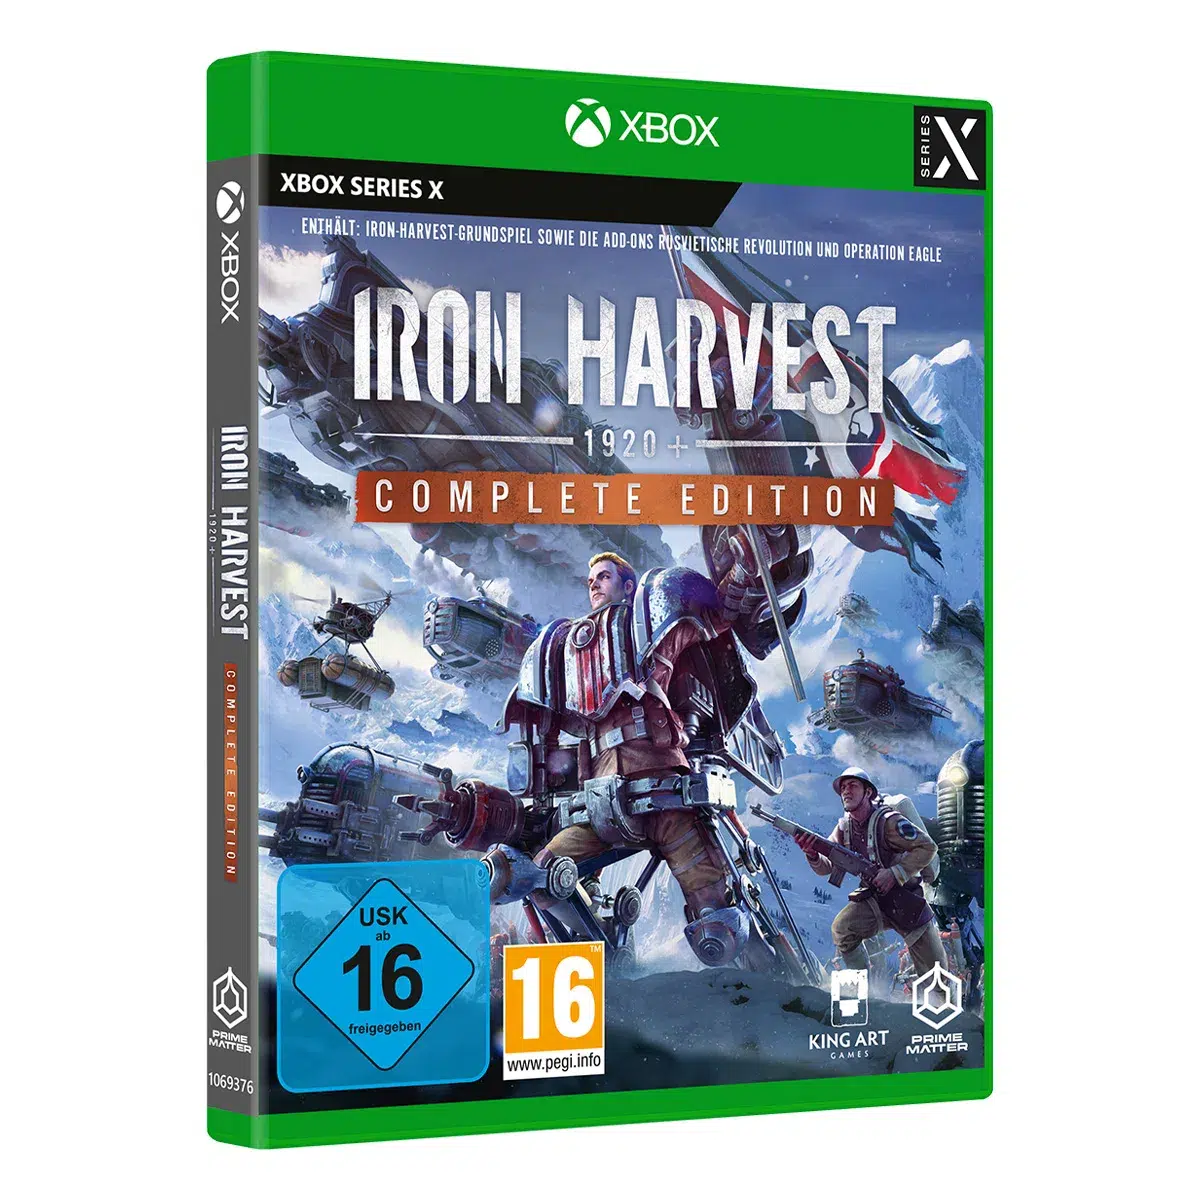 Iron Harvest - Complete Edition - XSRX